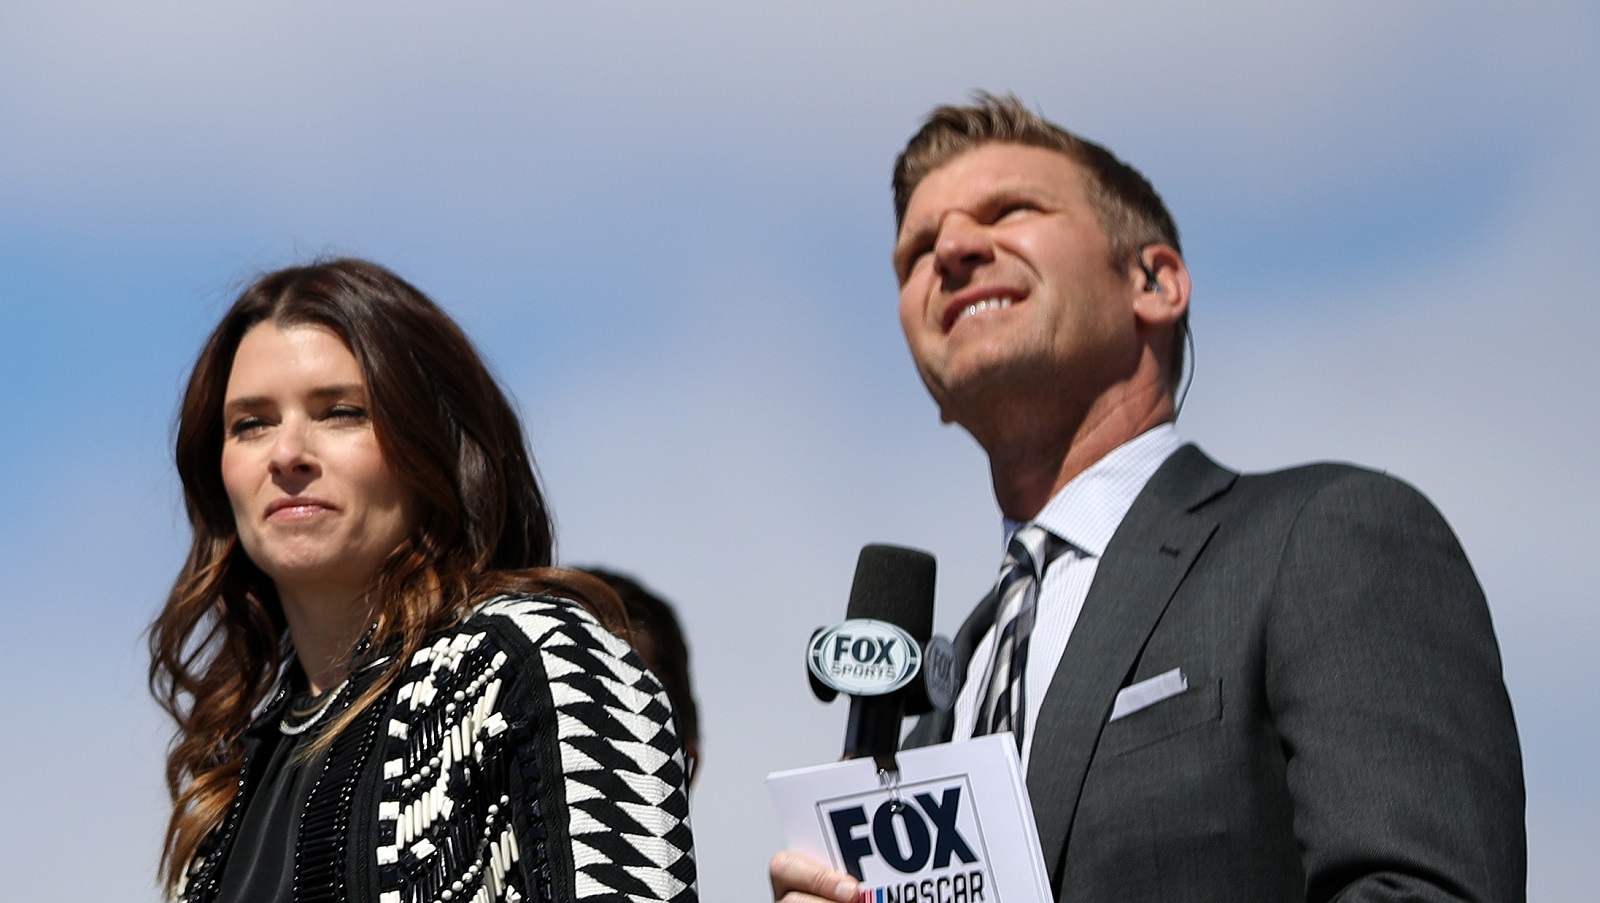 Fox Sports commentators Danica Patrick and Clint Bowyer look on during ceremonies prior to the NASCAR Cup Series Pennzoil 400 at Las Vegas Motor Speedway on March 6, 2022.